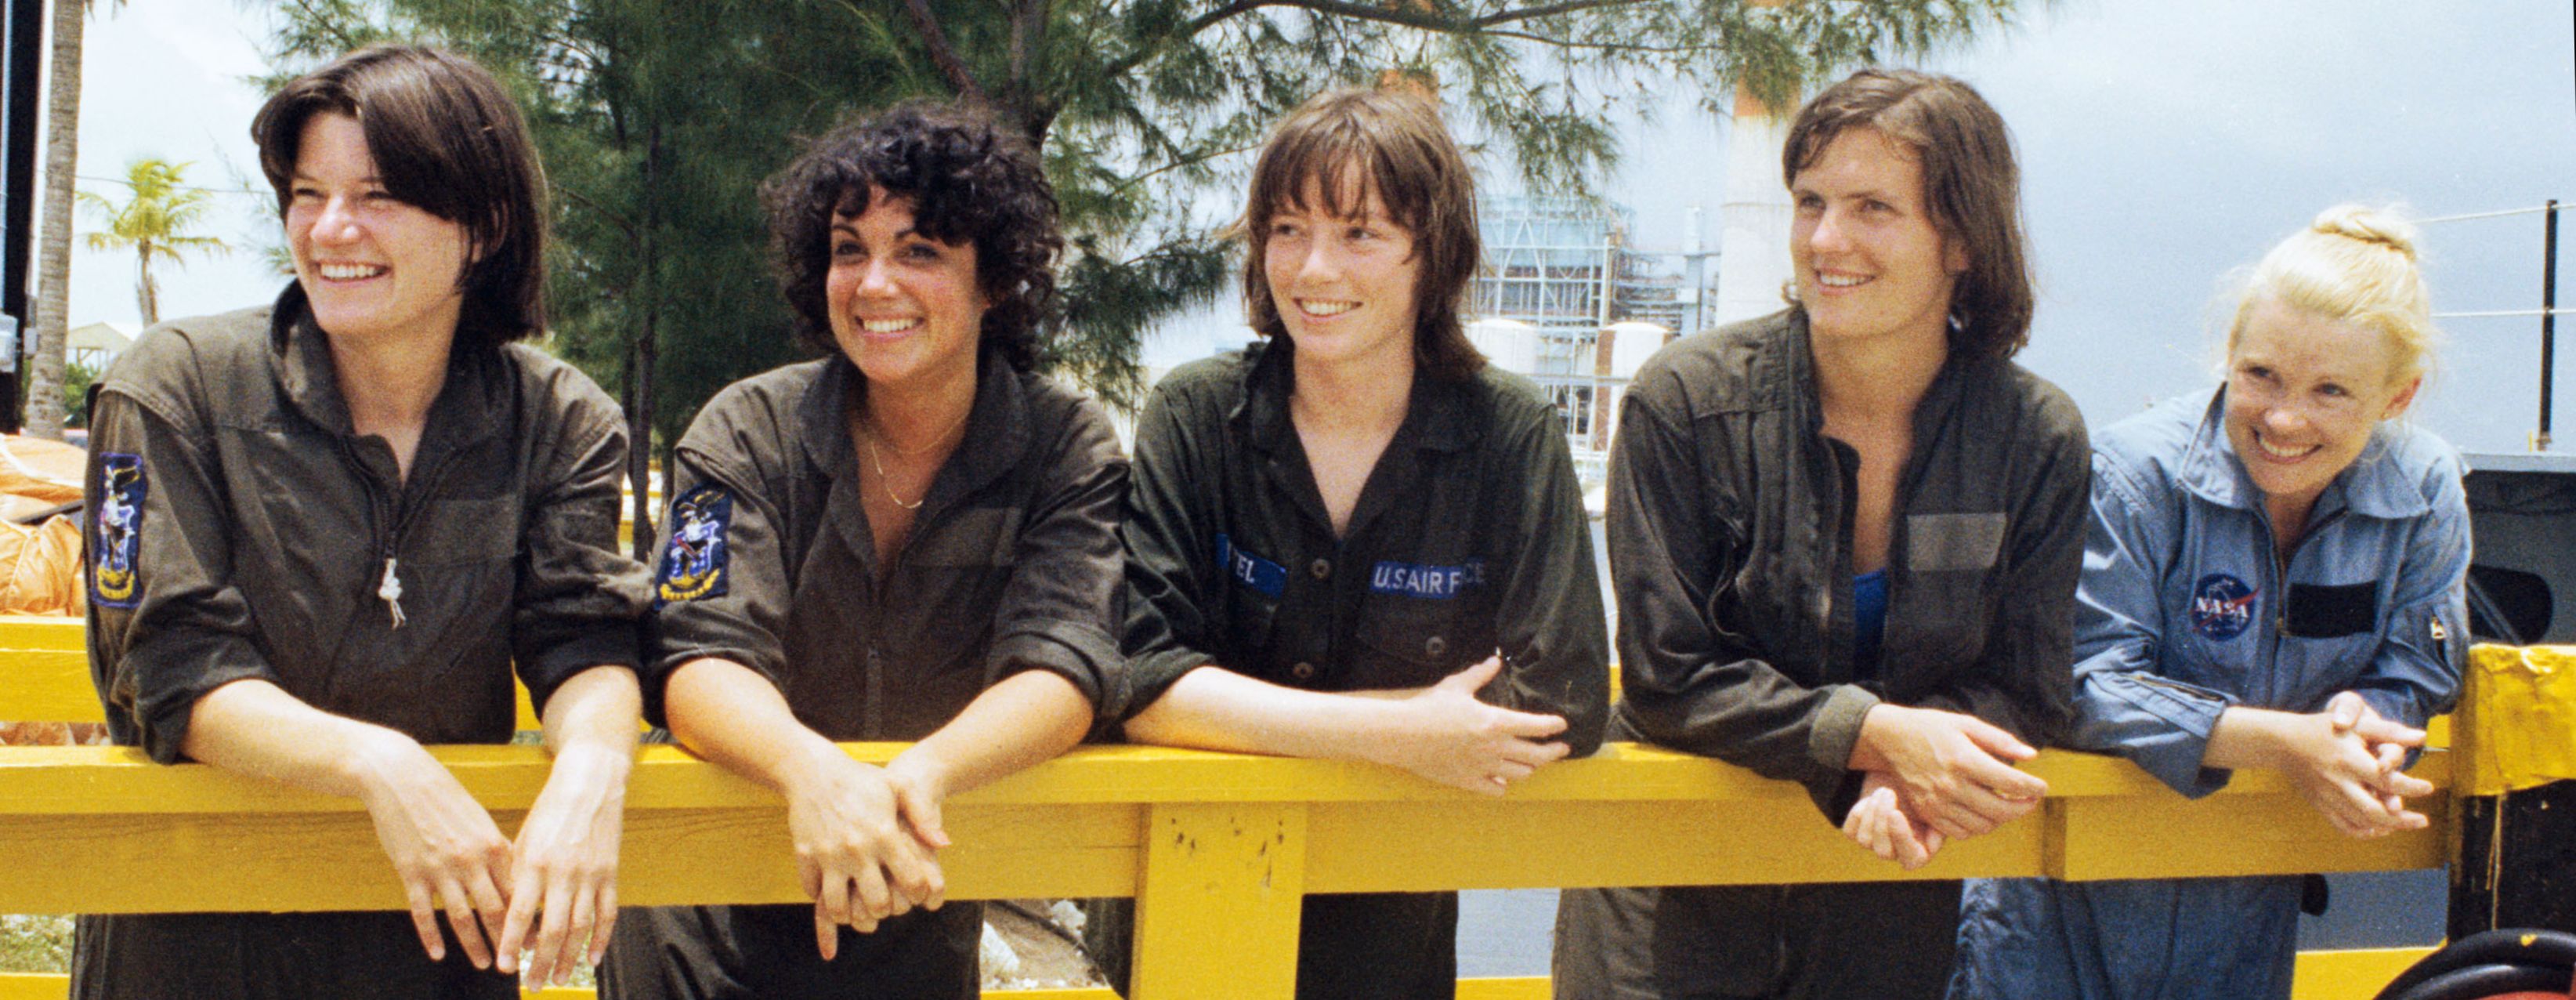 Sally Ride (left) with four other astronaut candidates took a break in during water survival training in 1978. Photo NASA.